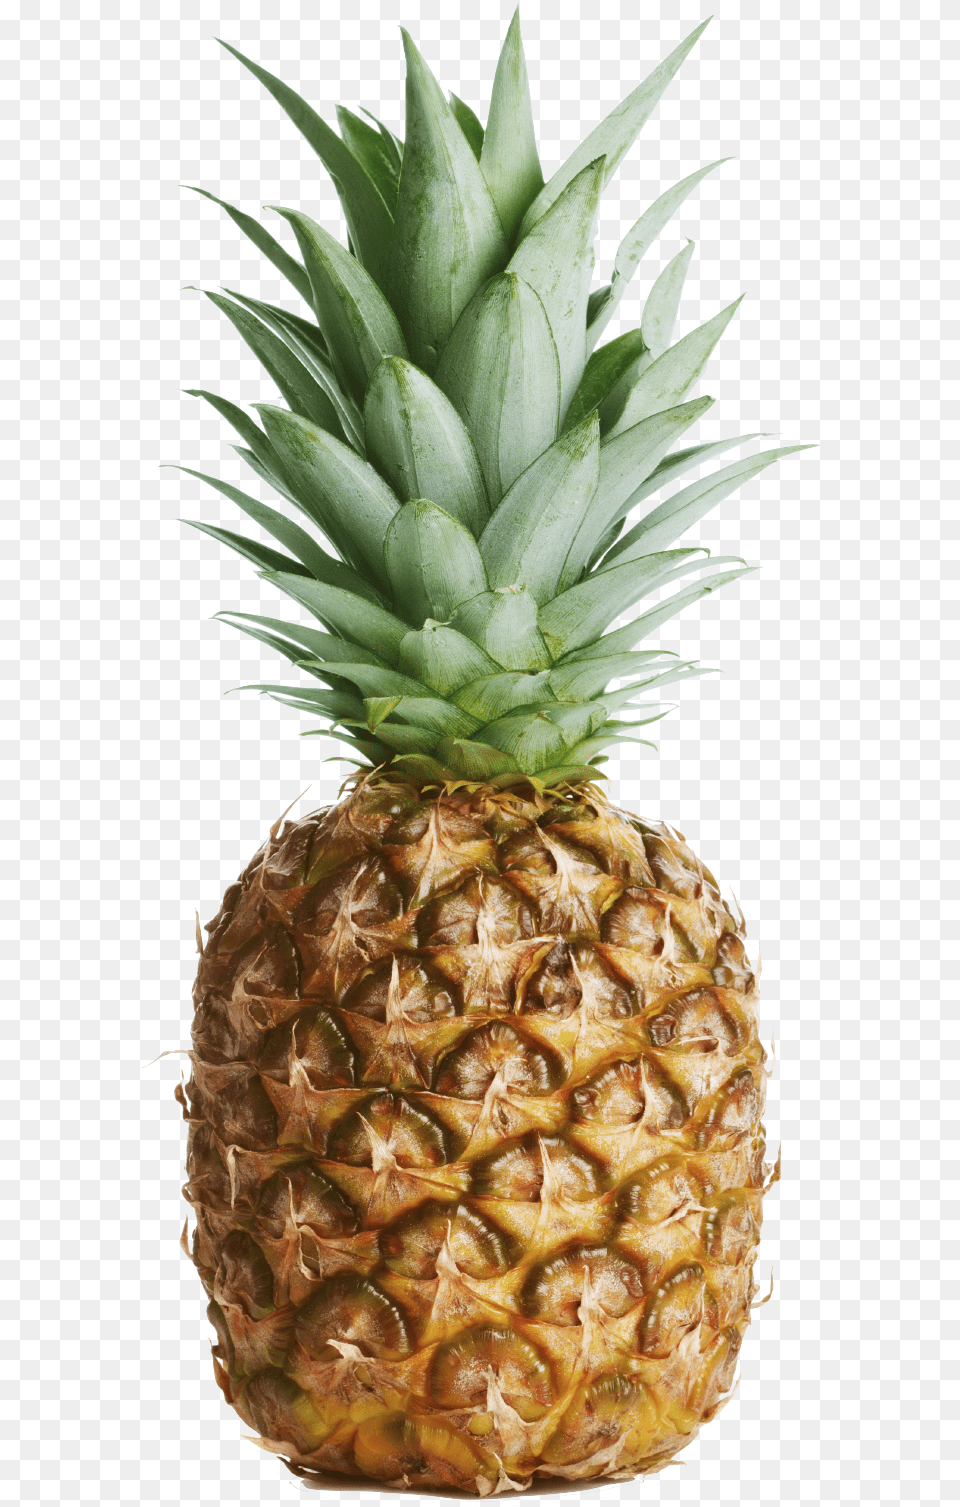 Pineapple No Background Pineapple With No Background, Food, Fruit, Plant, Produce Free Png Download